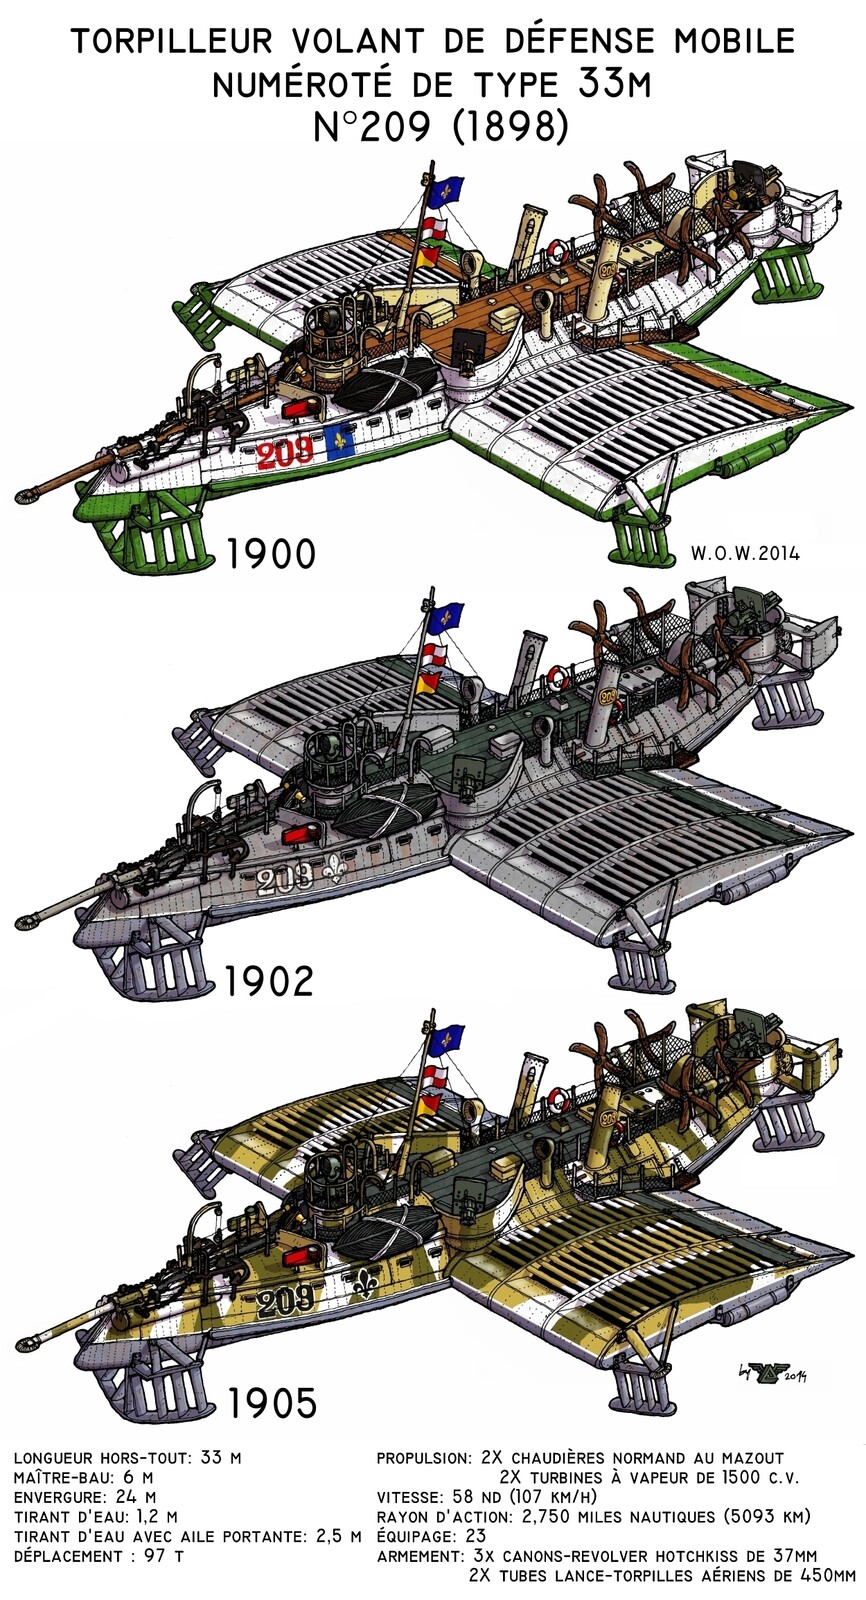 Concept art for French flying destroyers, based around the hydrofoil designs of Italian engineer Enrico Forlanini, who experimented with hydrofoils around 1898 in real life. Seen here in peacetime and two types of wartime painting schemes. 